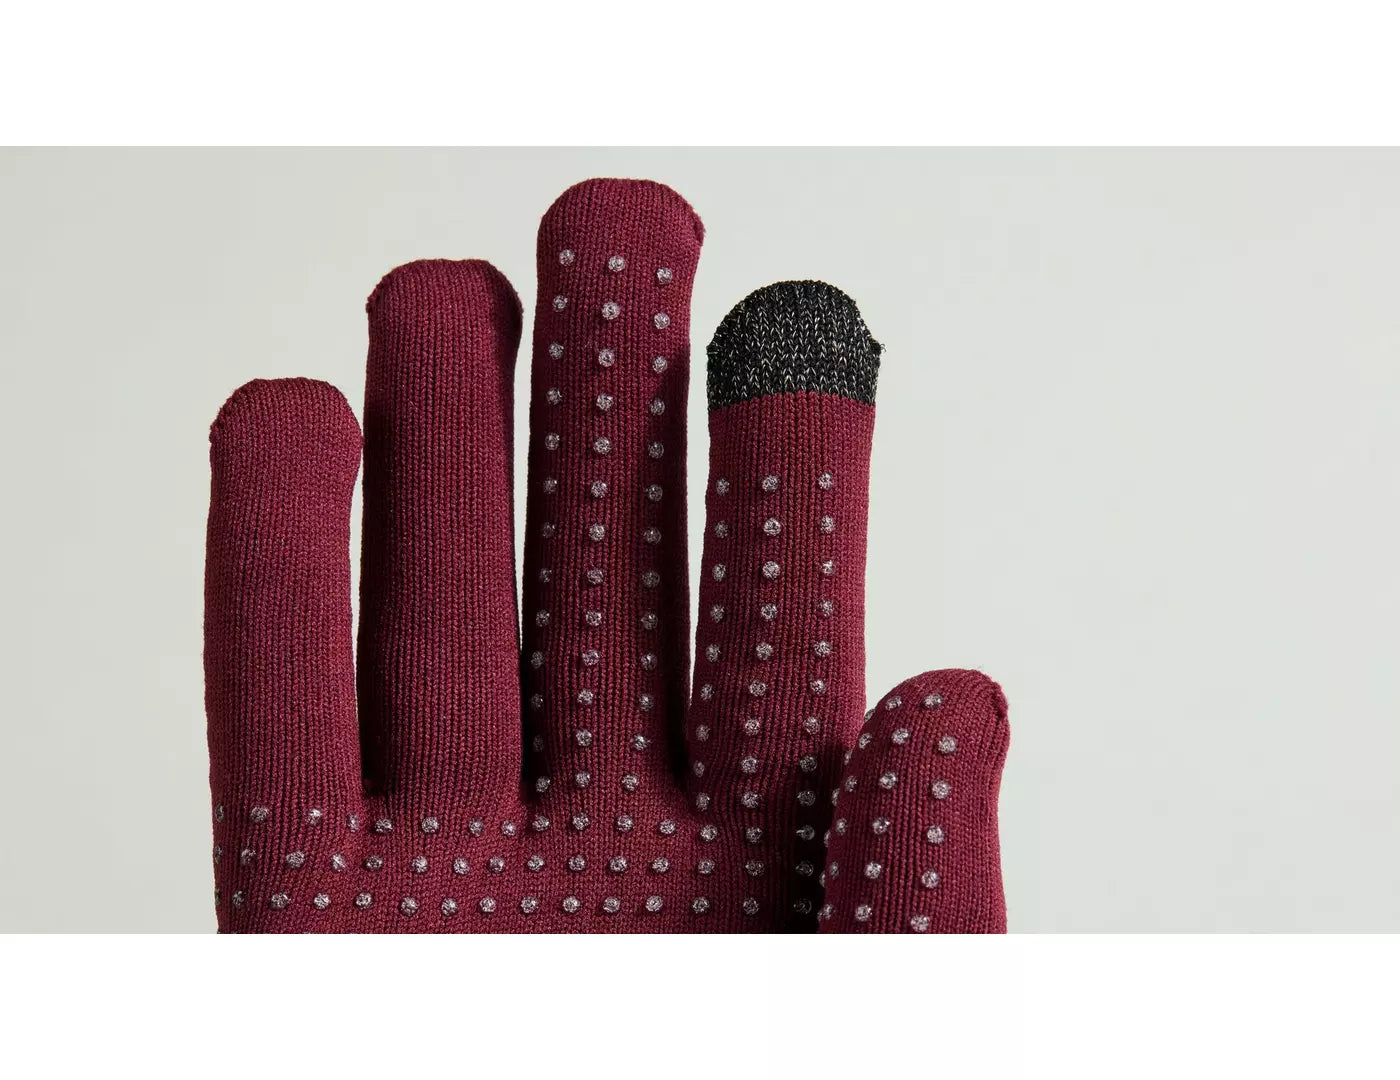 Specialized Thermal Knit Bicycle Gloves